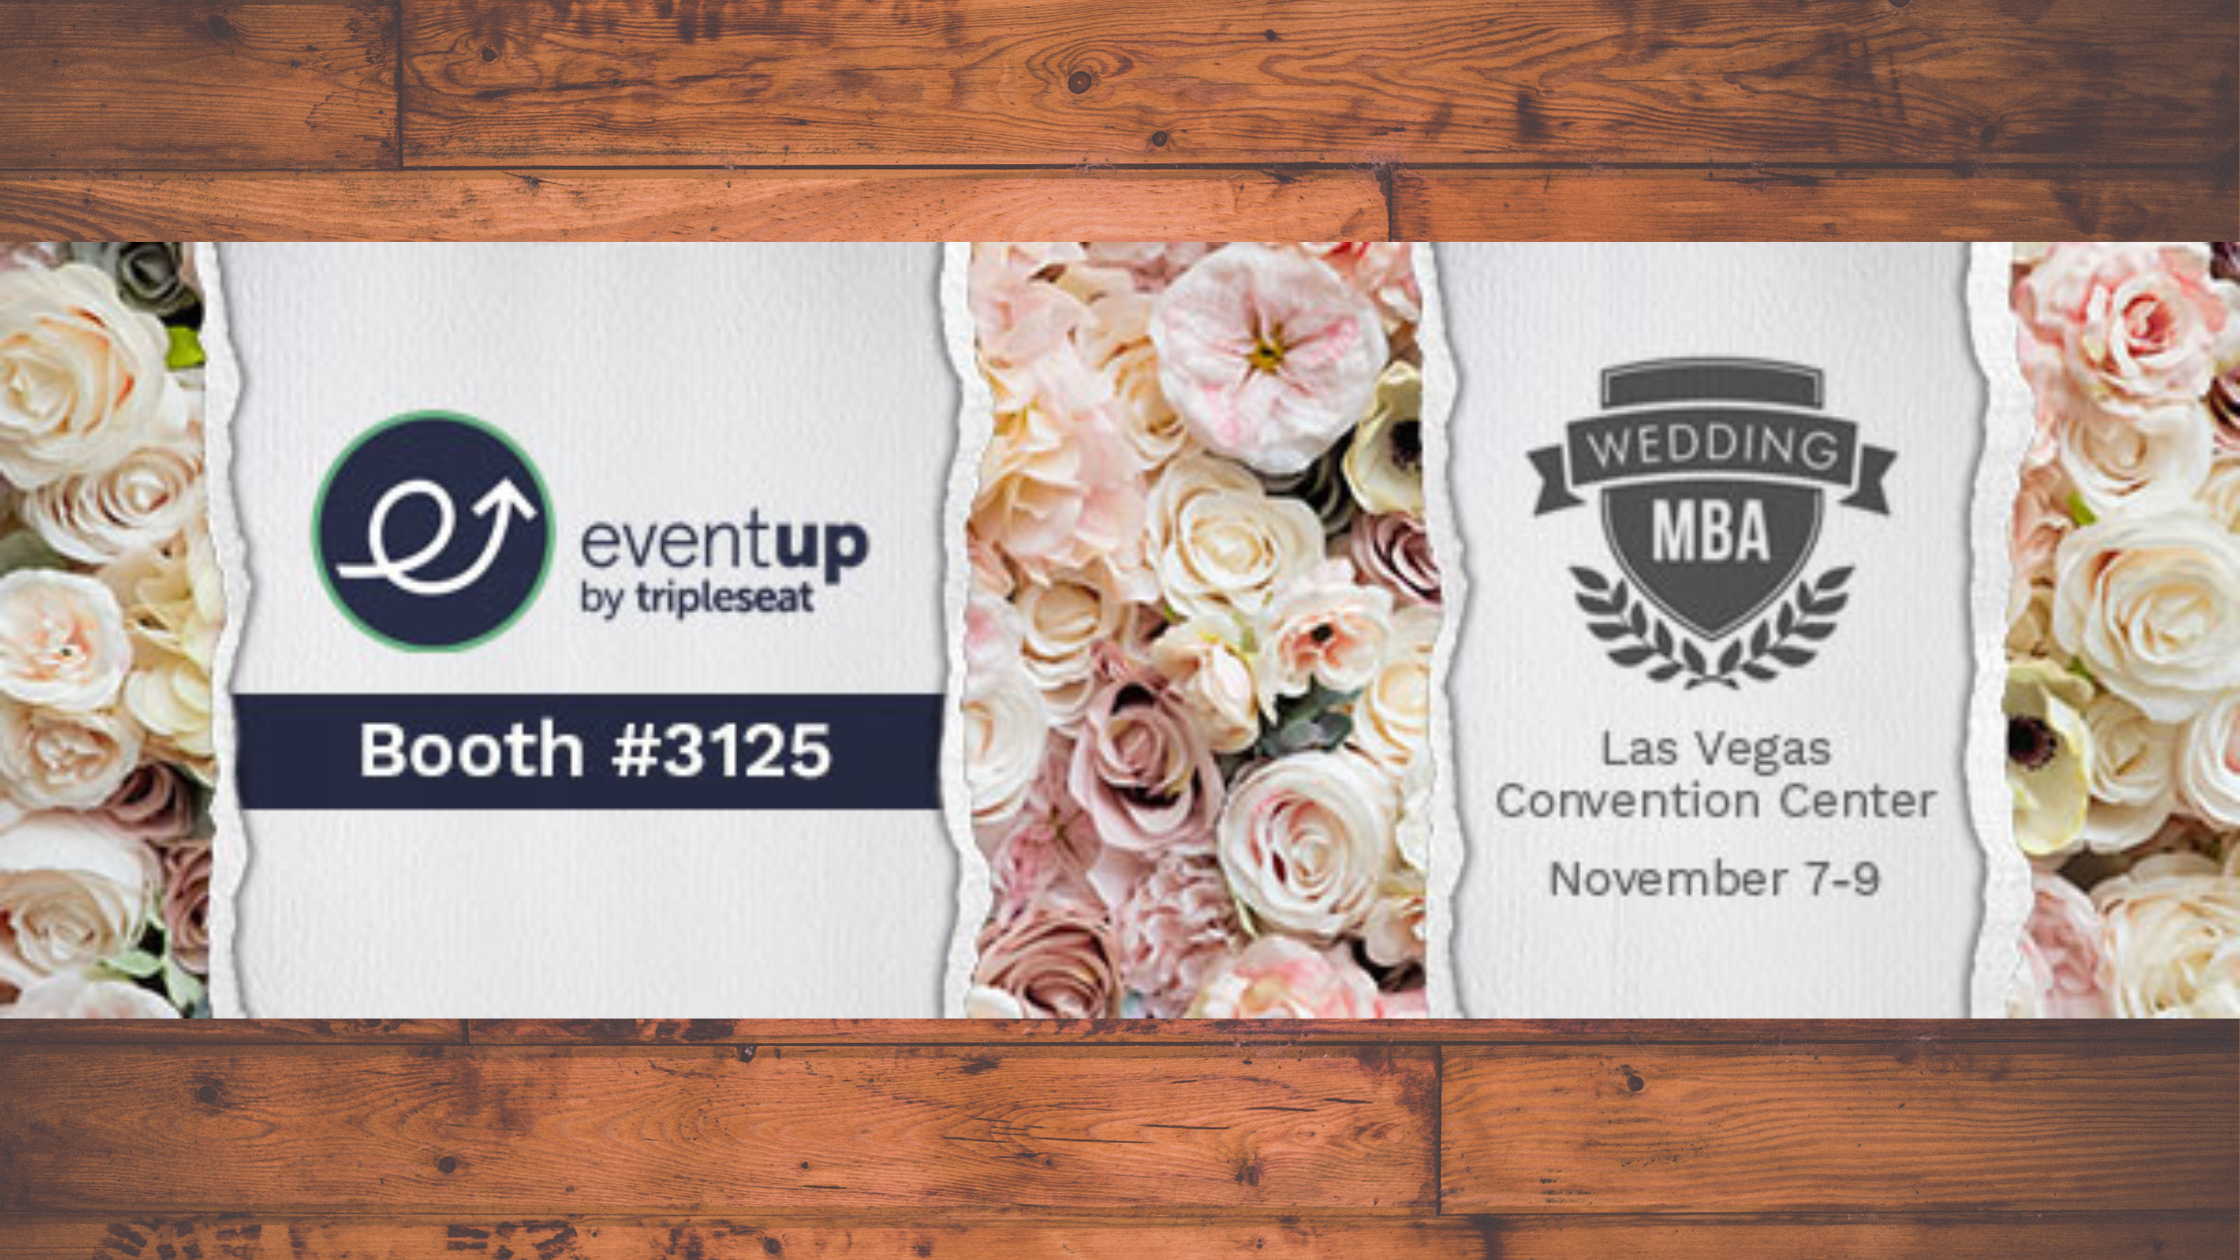 EventUp by Tripleseat Exhibiting at WeddingMBA Nov 7-9